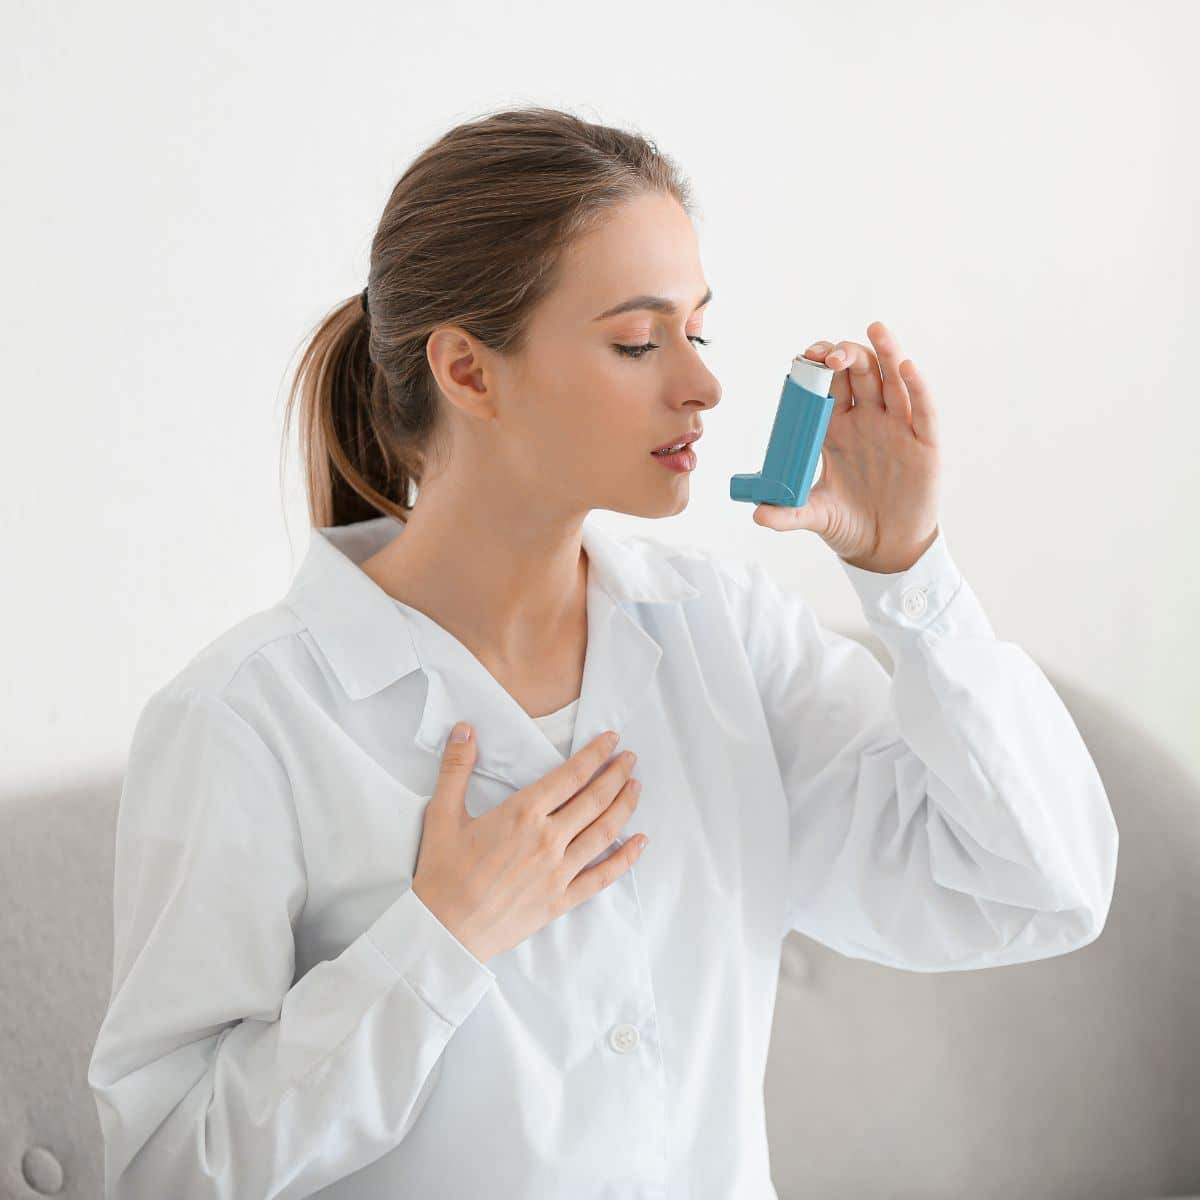 Spiritual meaning of asthma